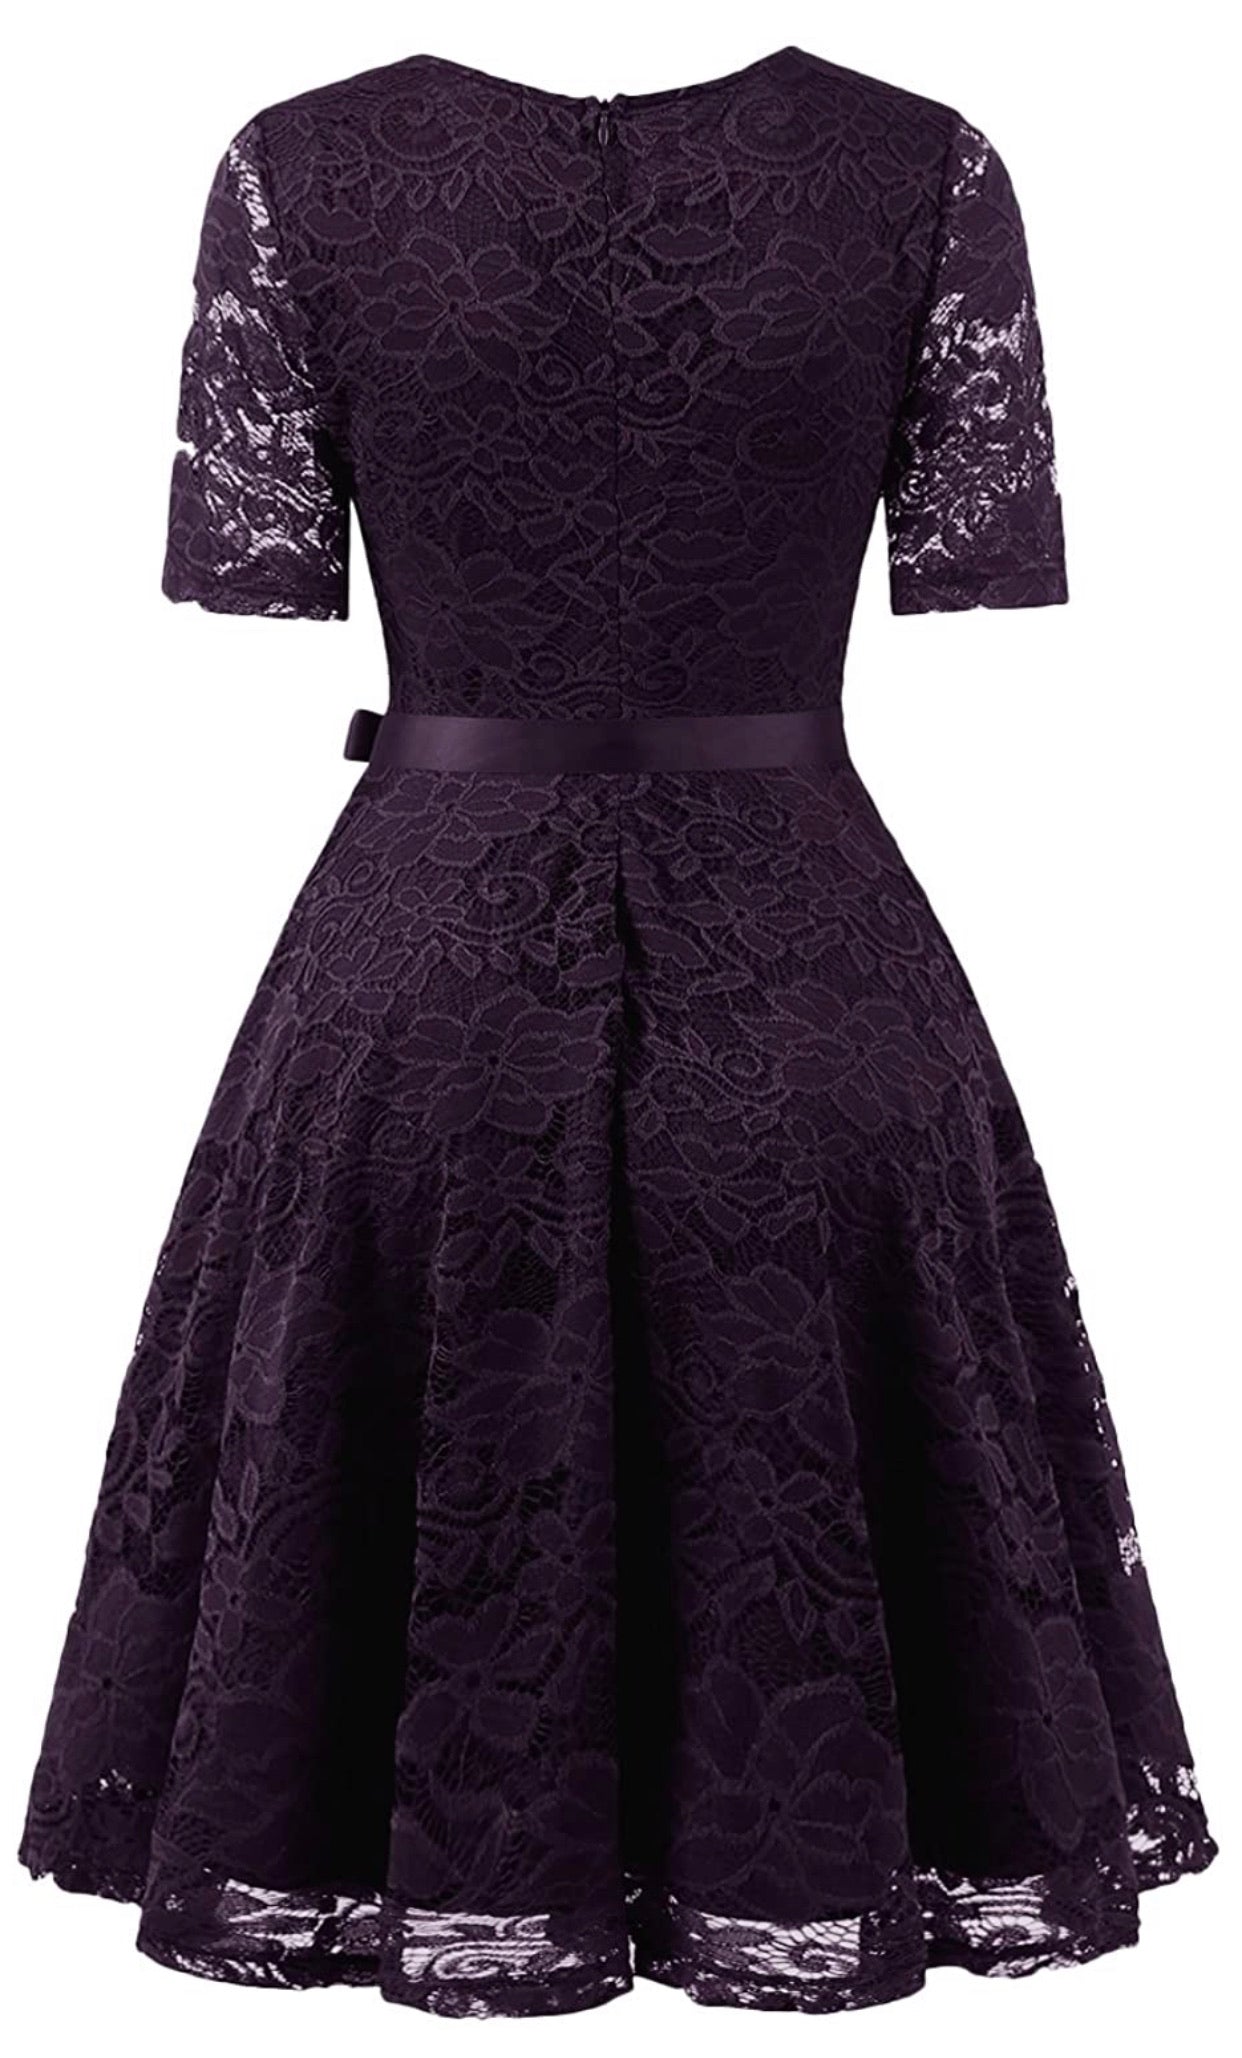 Vintage Inspired Full Lace Cocktail Dress, Sizes Small - 3XLarge (Grape)